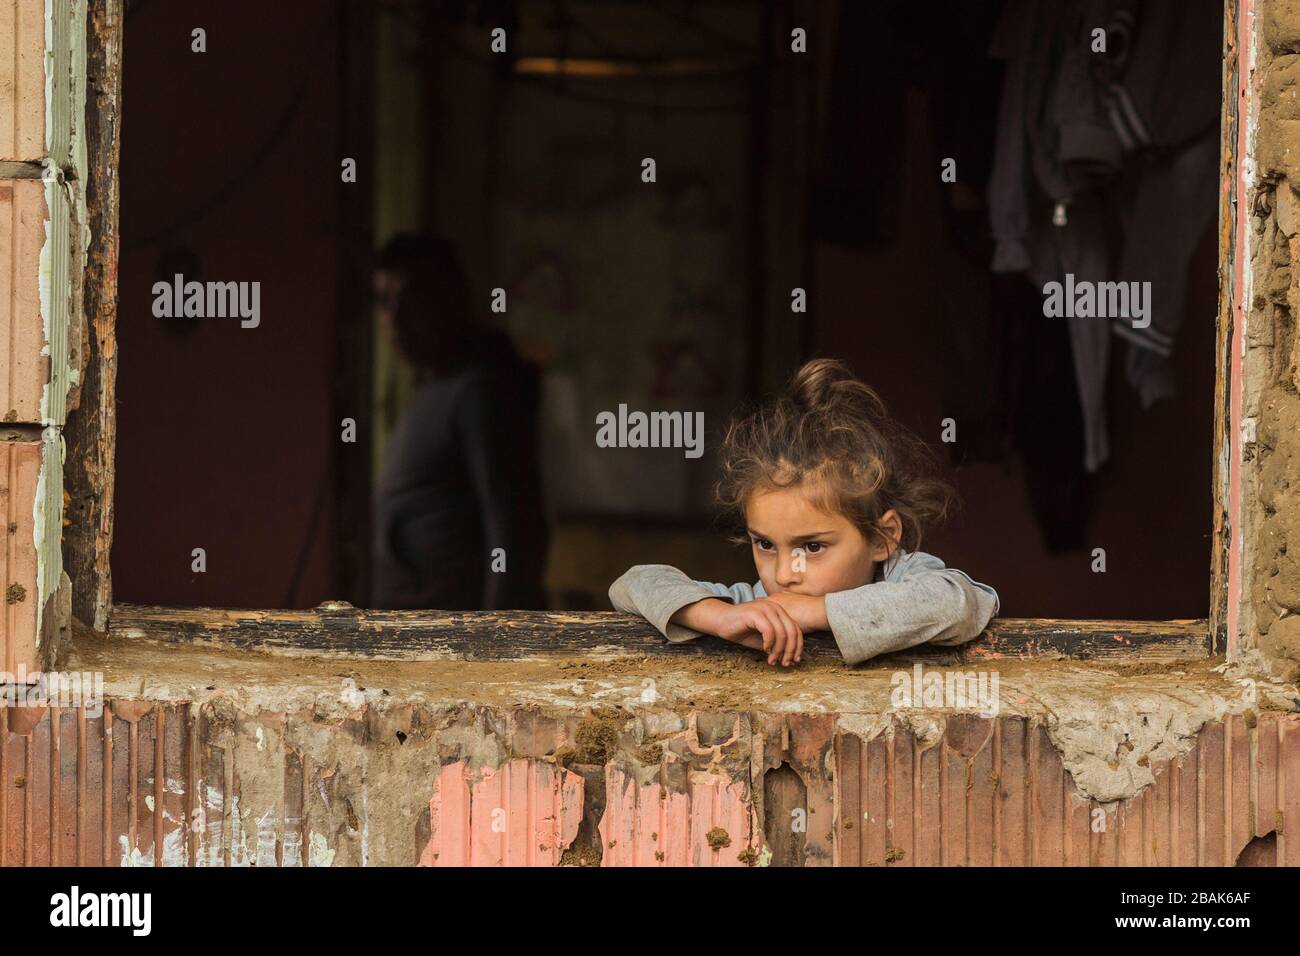 Young, sad gypsy girl alone in a poor gypsy community in rural Hungary. Stock Photo